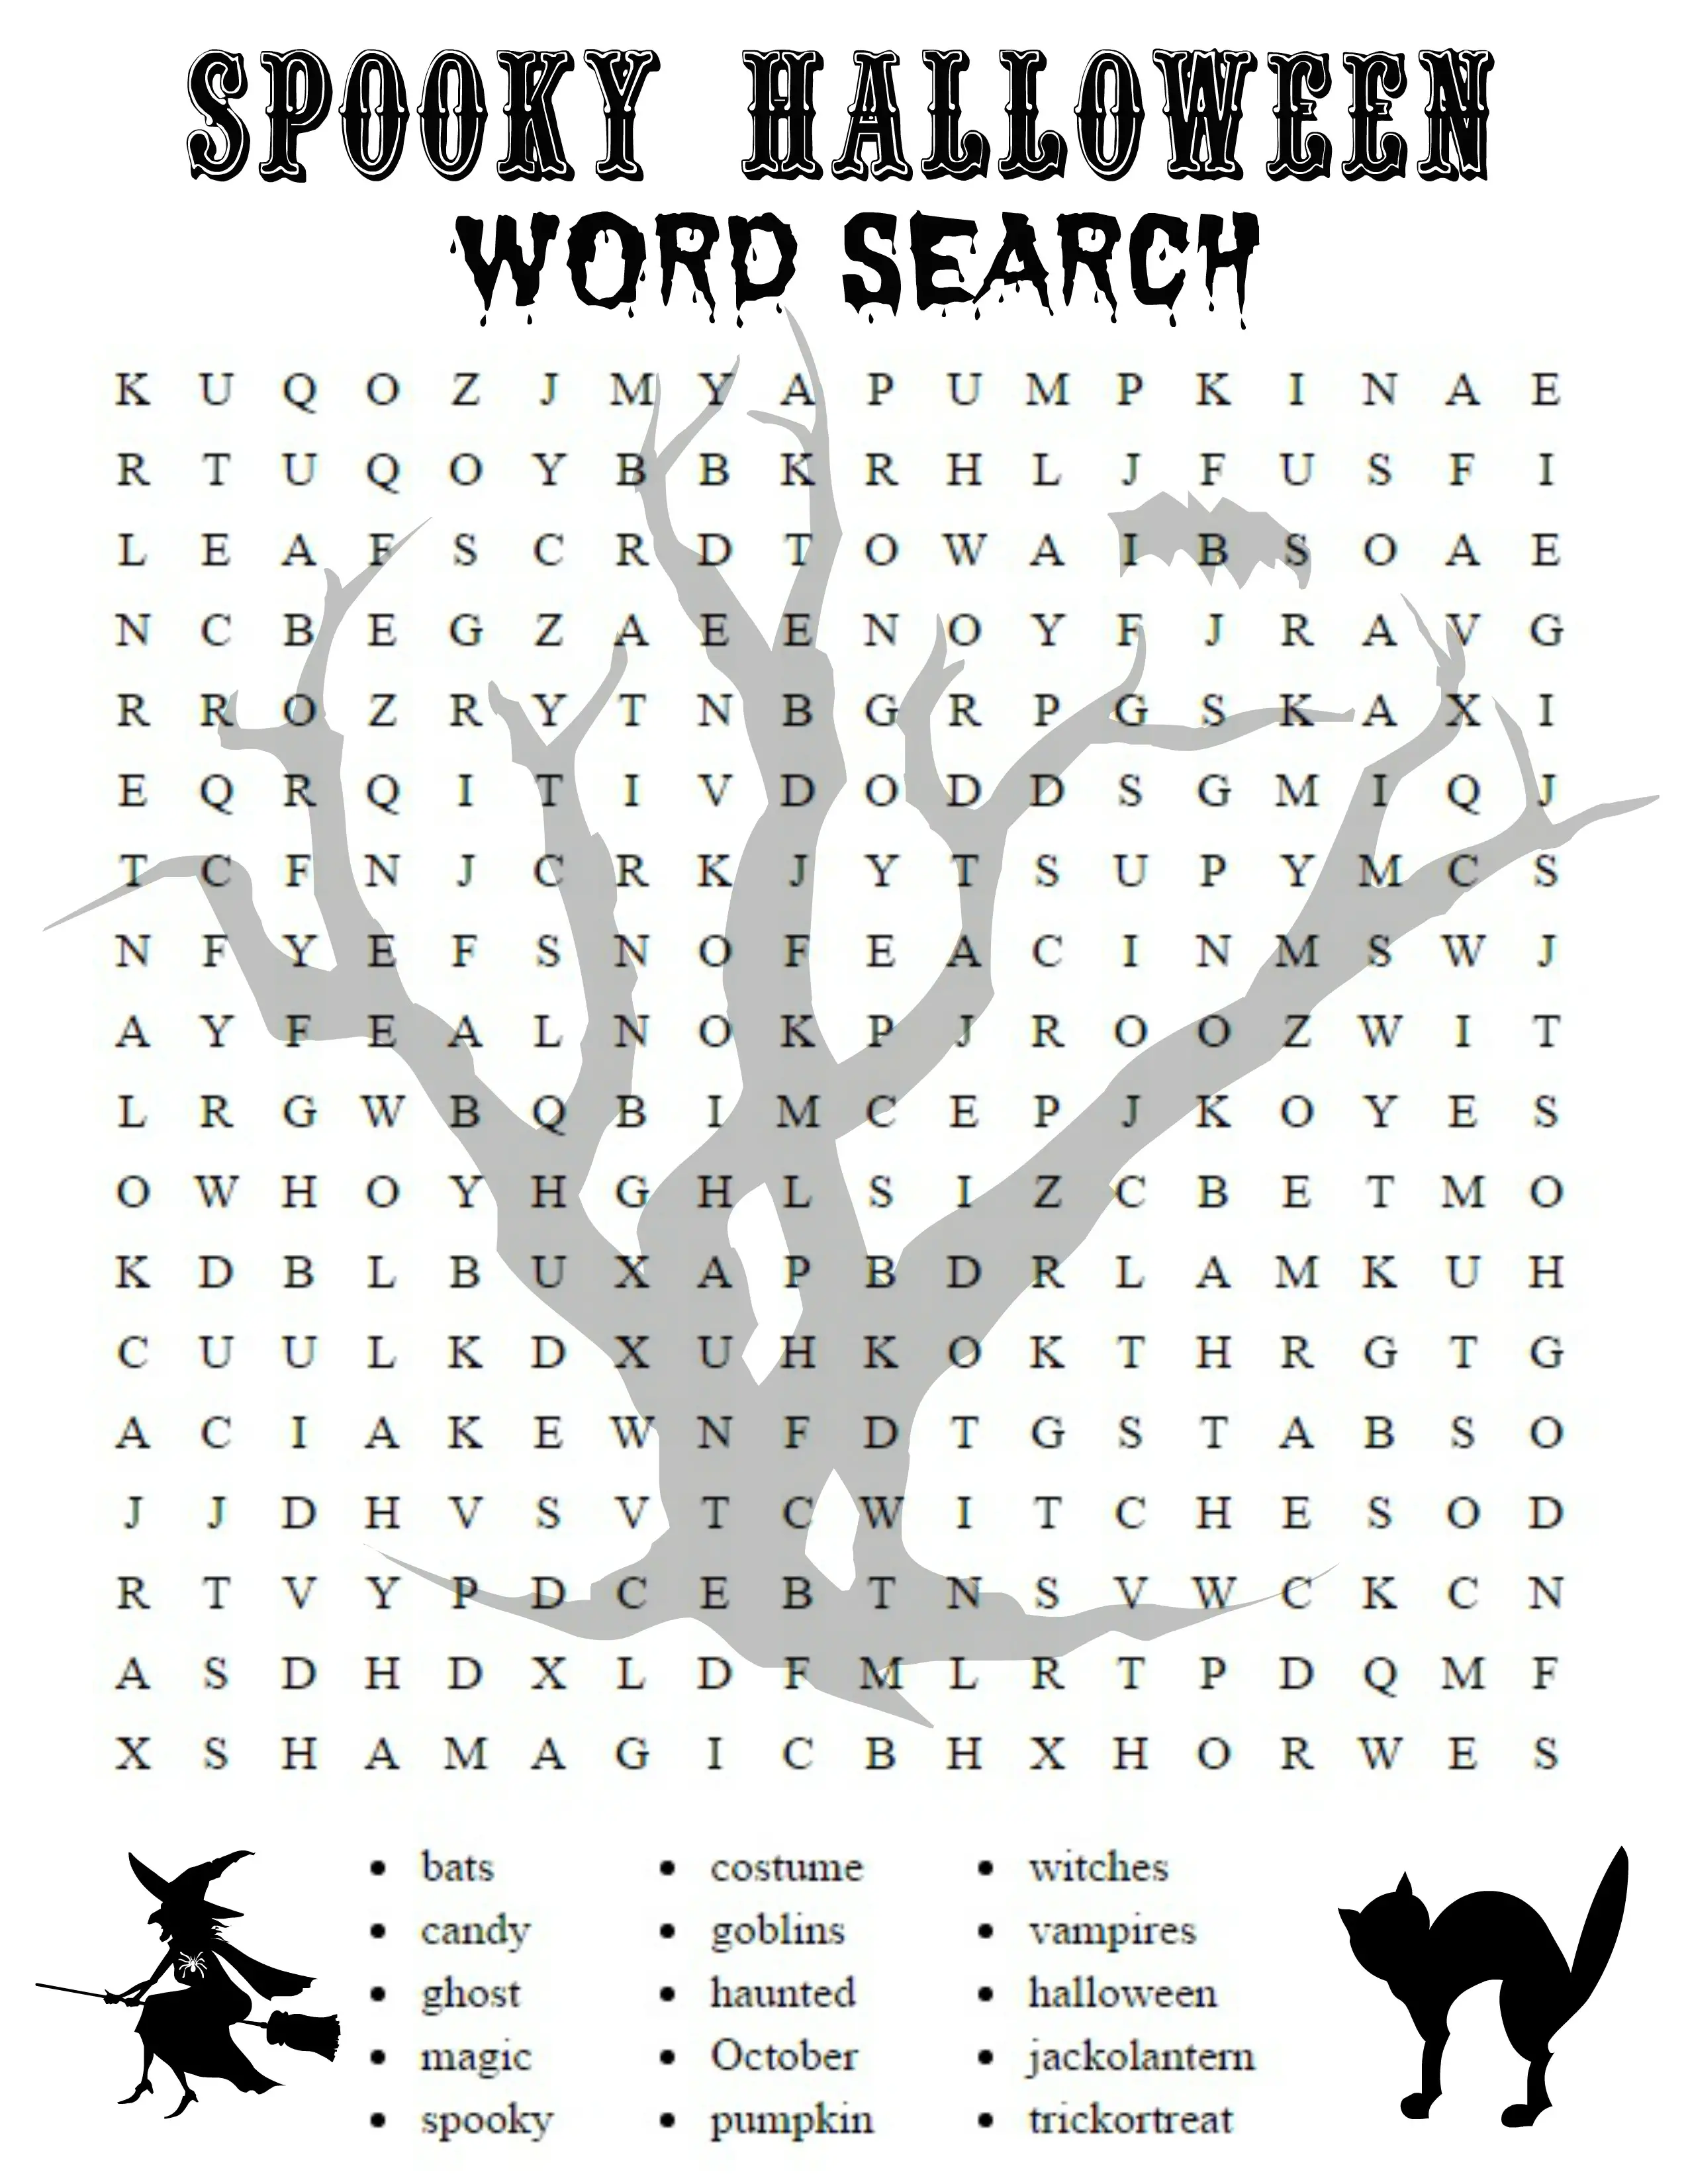 26-spooky-halloween-word-searches-kittybabylove